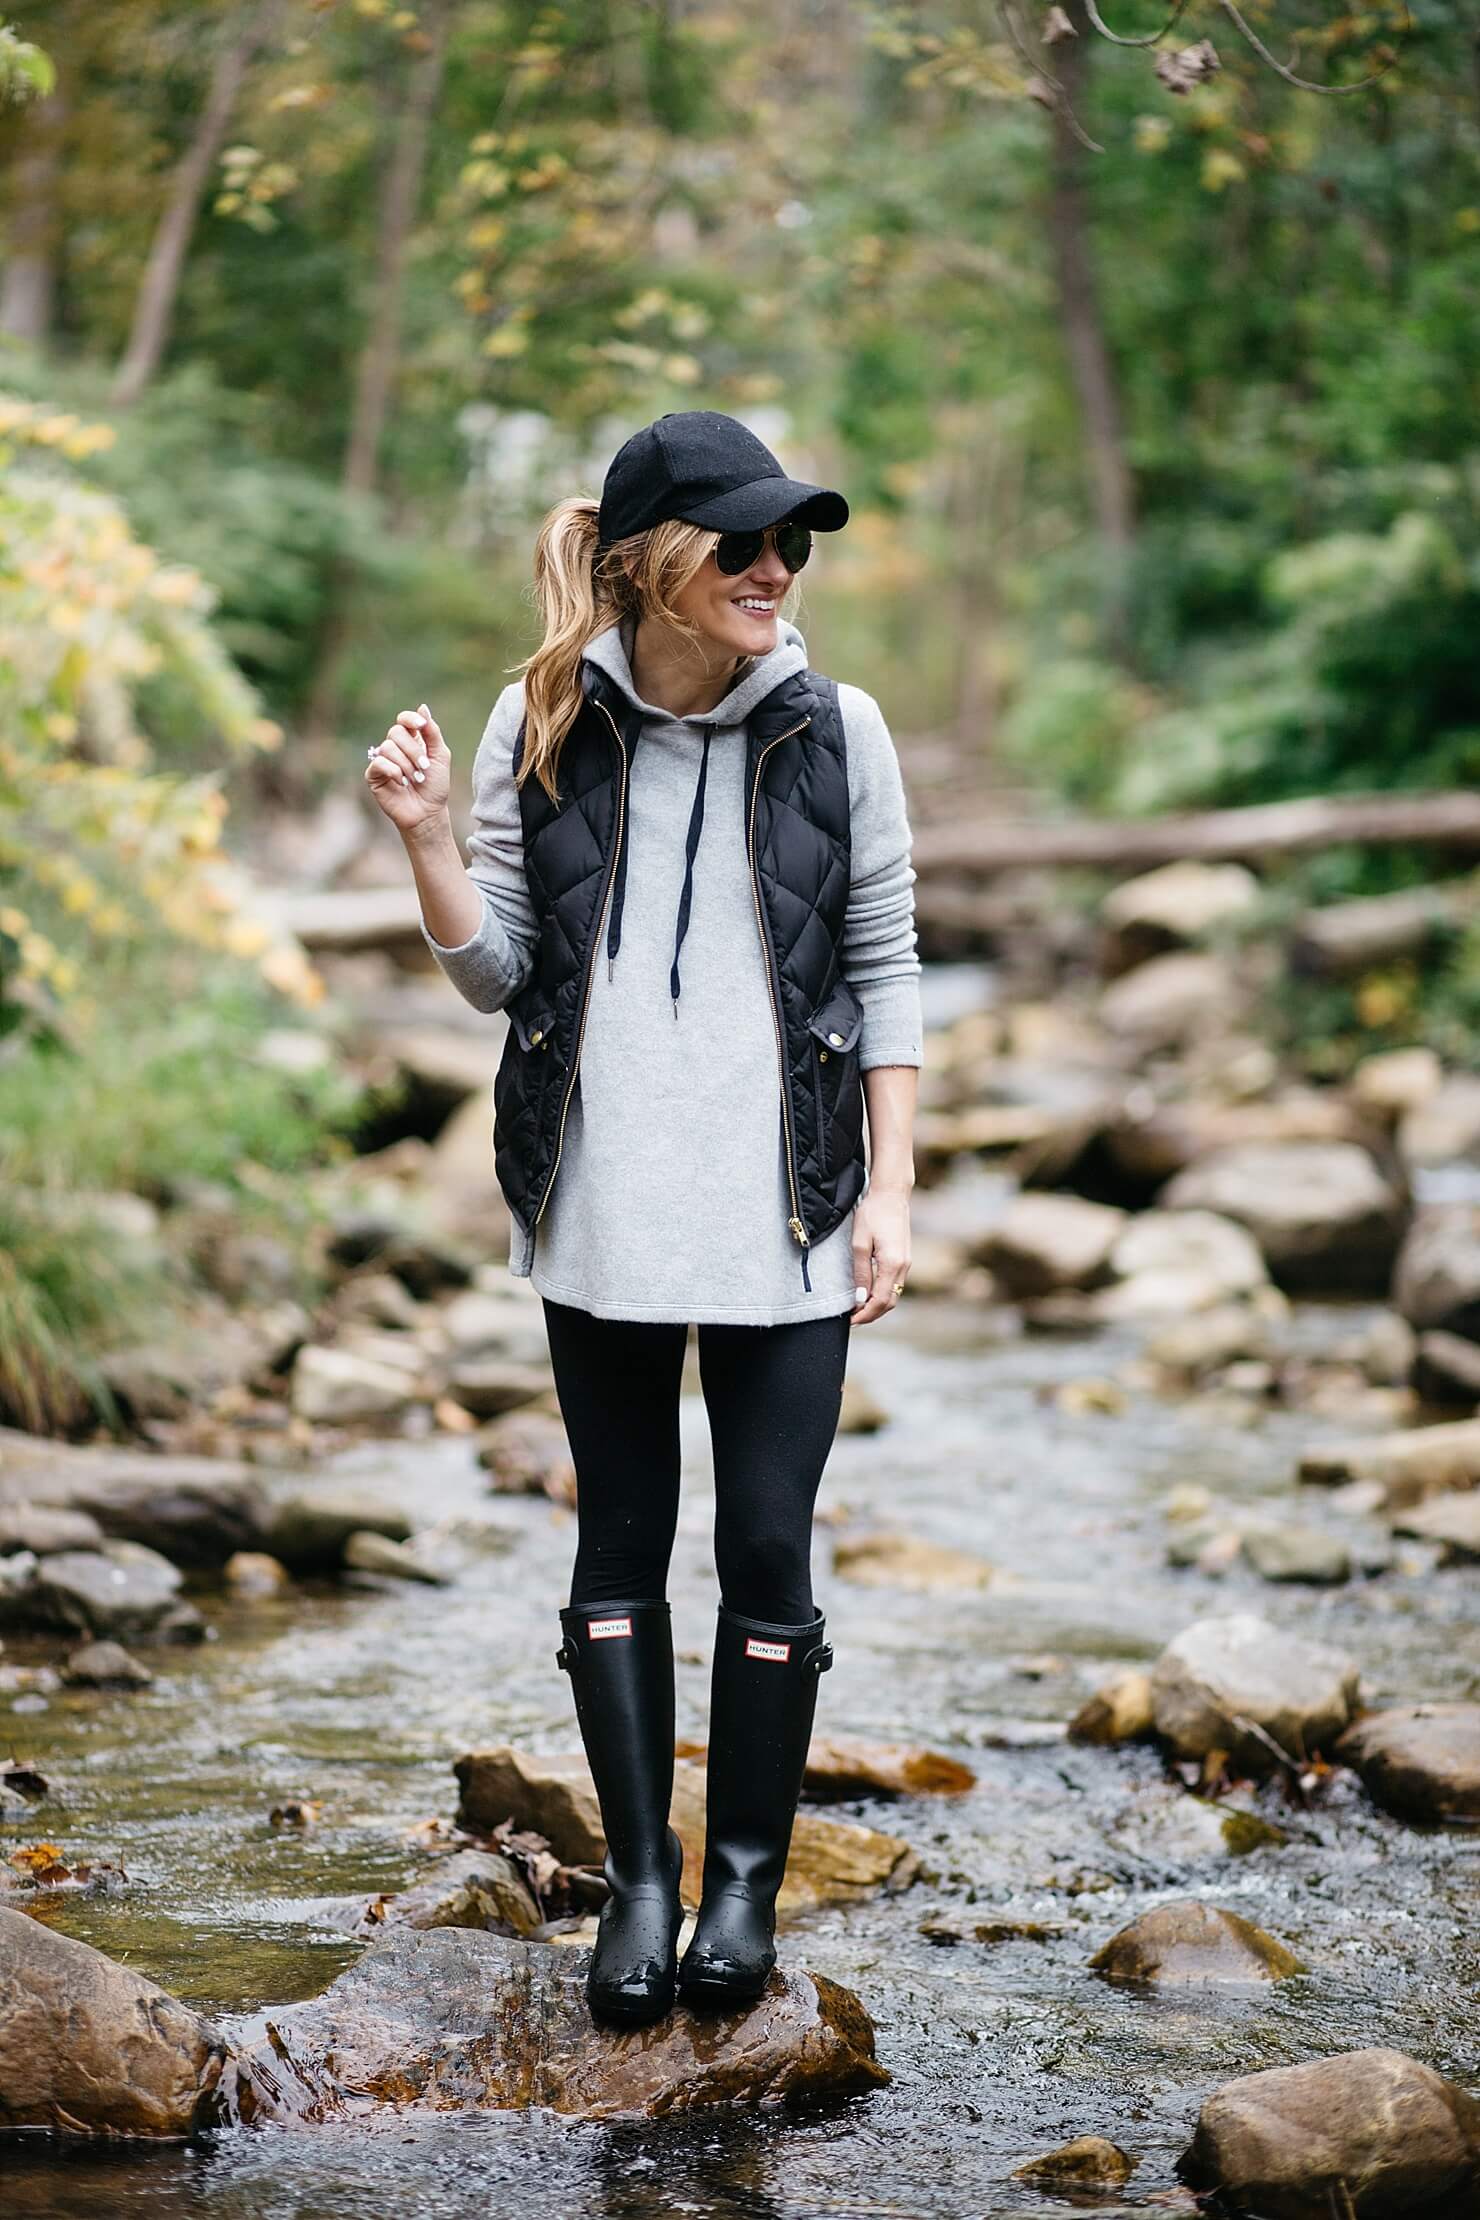 Easy and Cute Snow Outfits with Hunter Boots